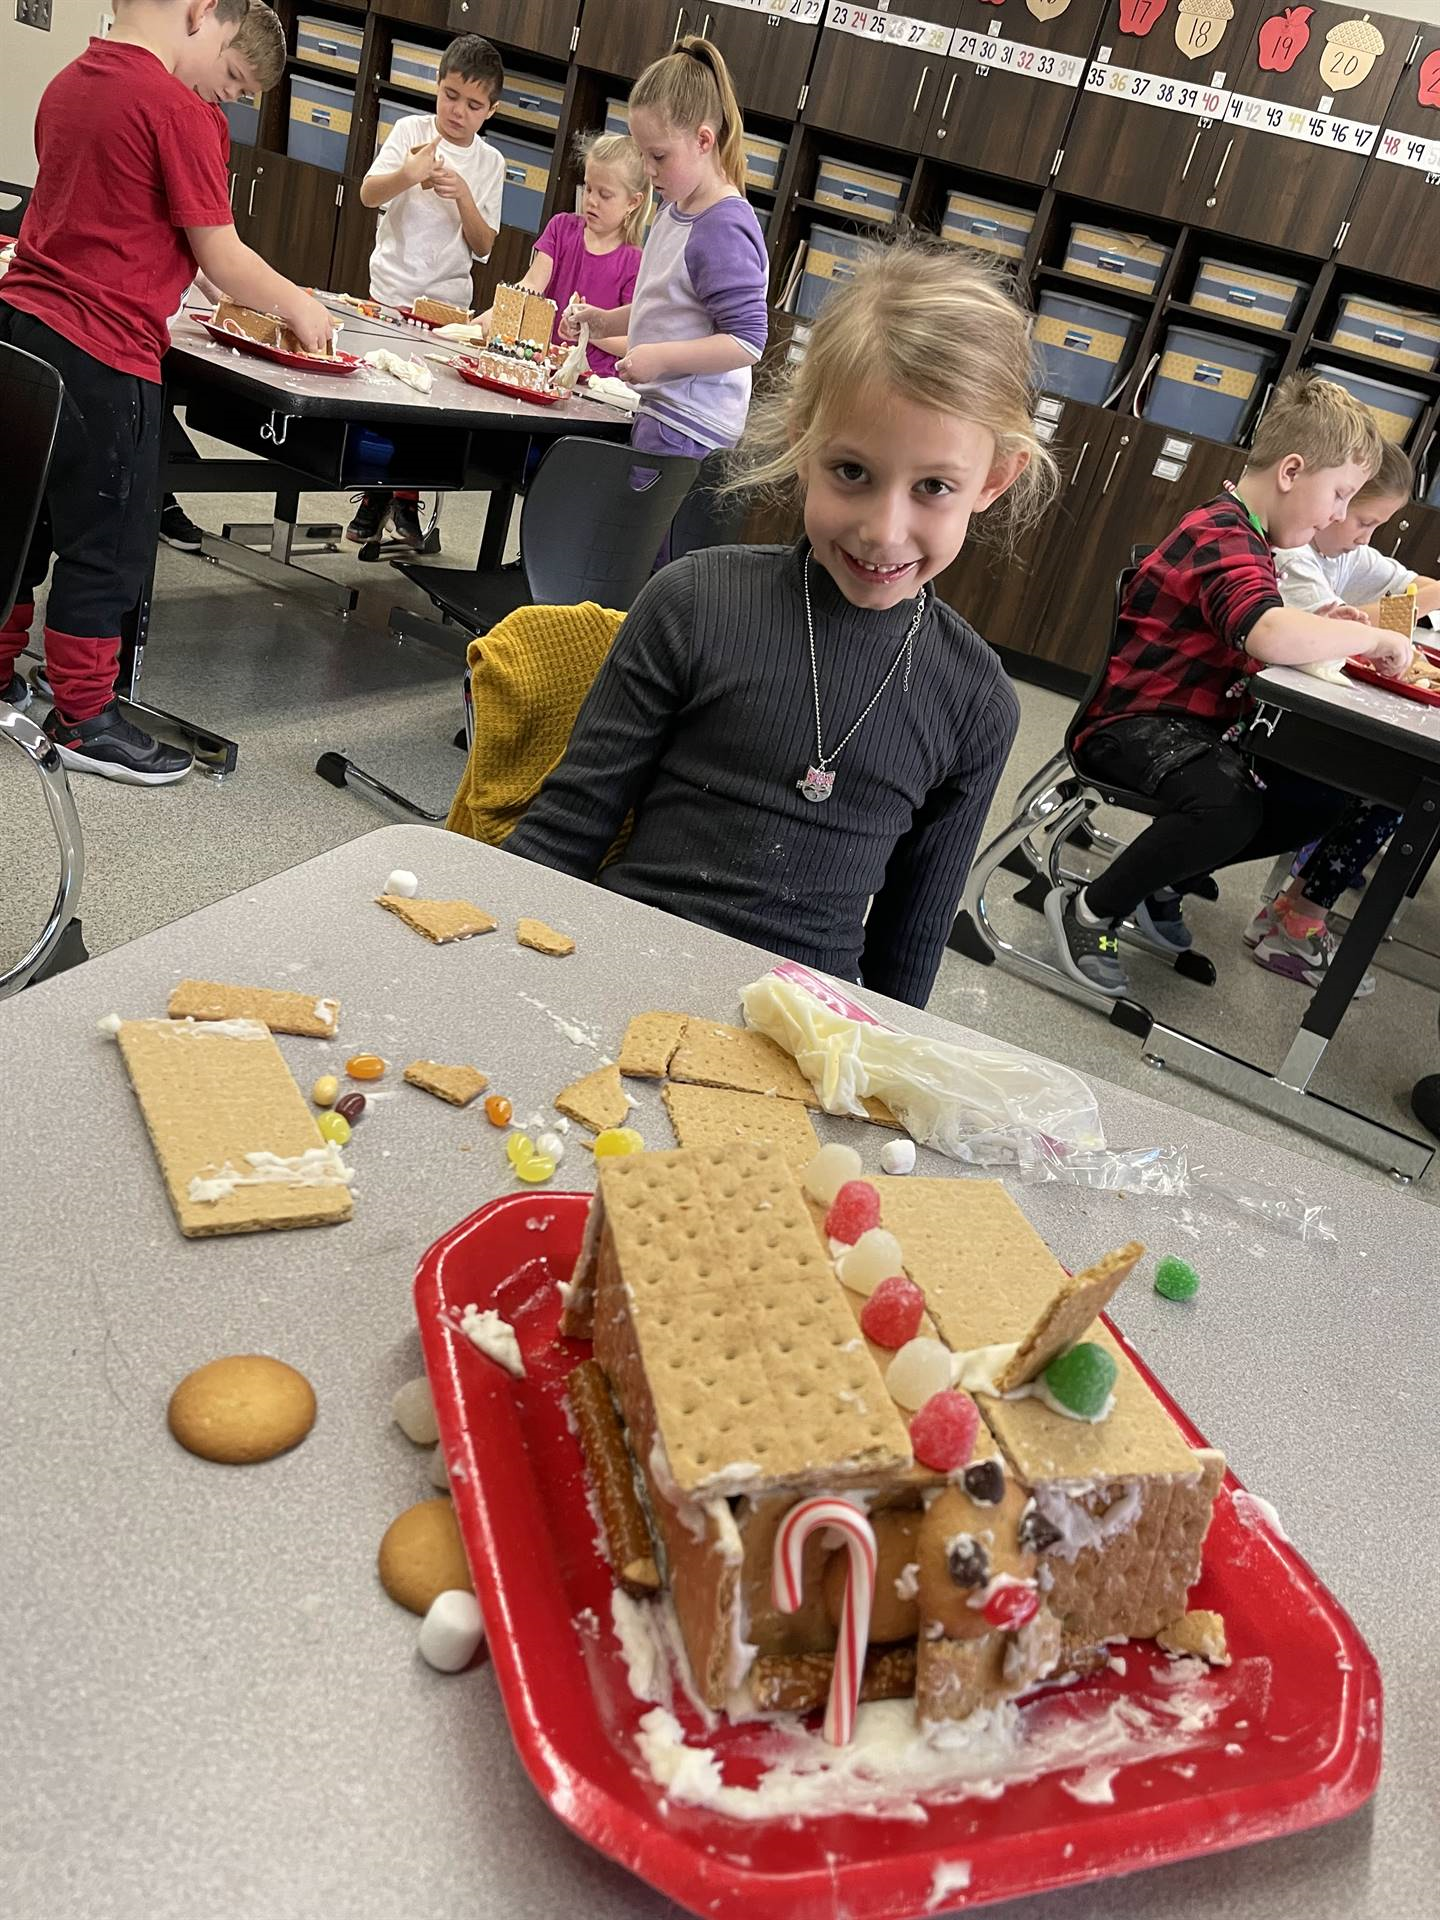 Avery with gingerbread house